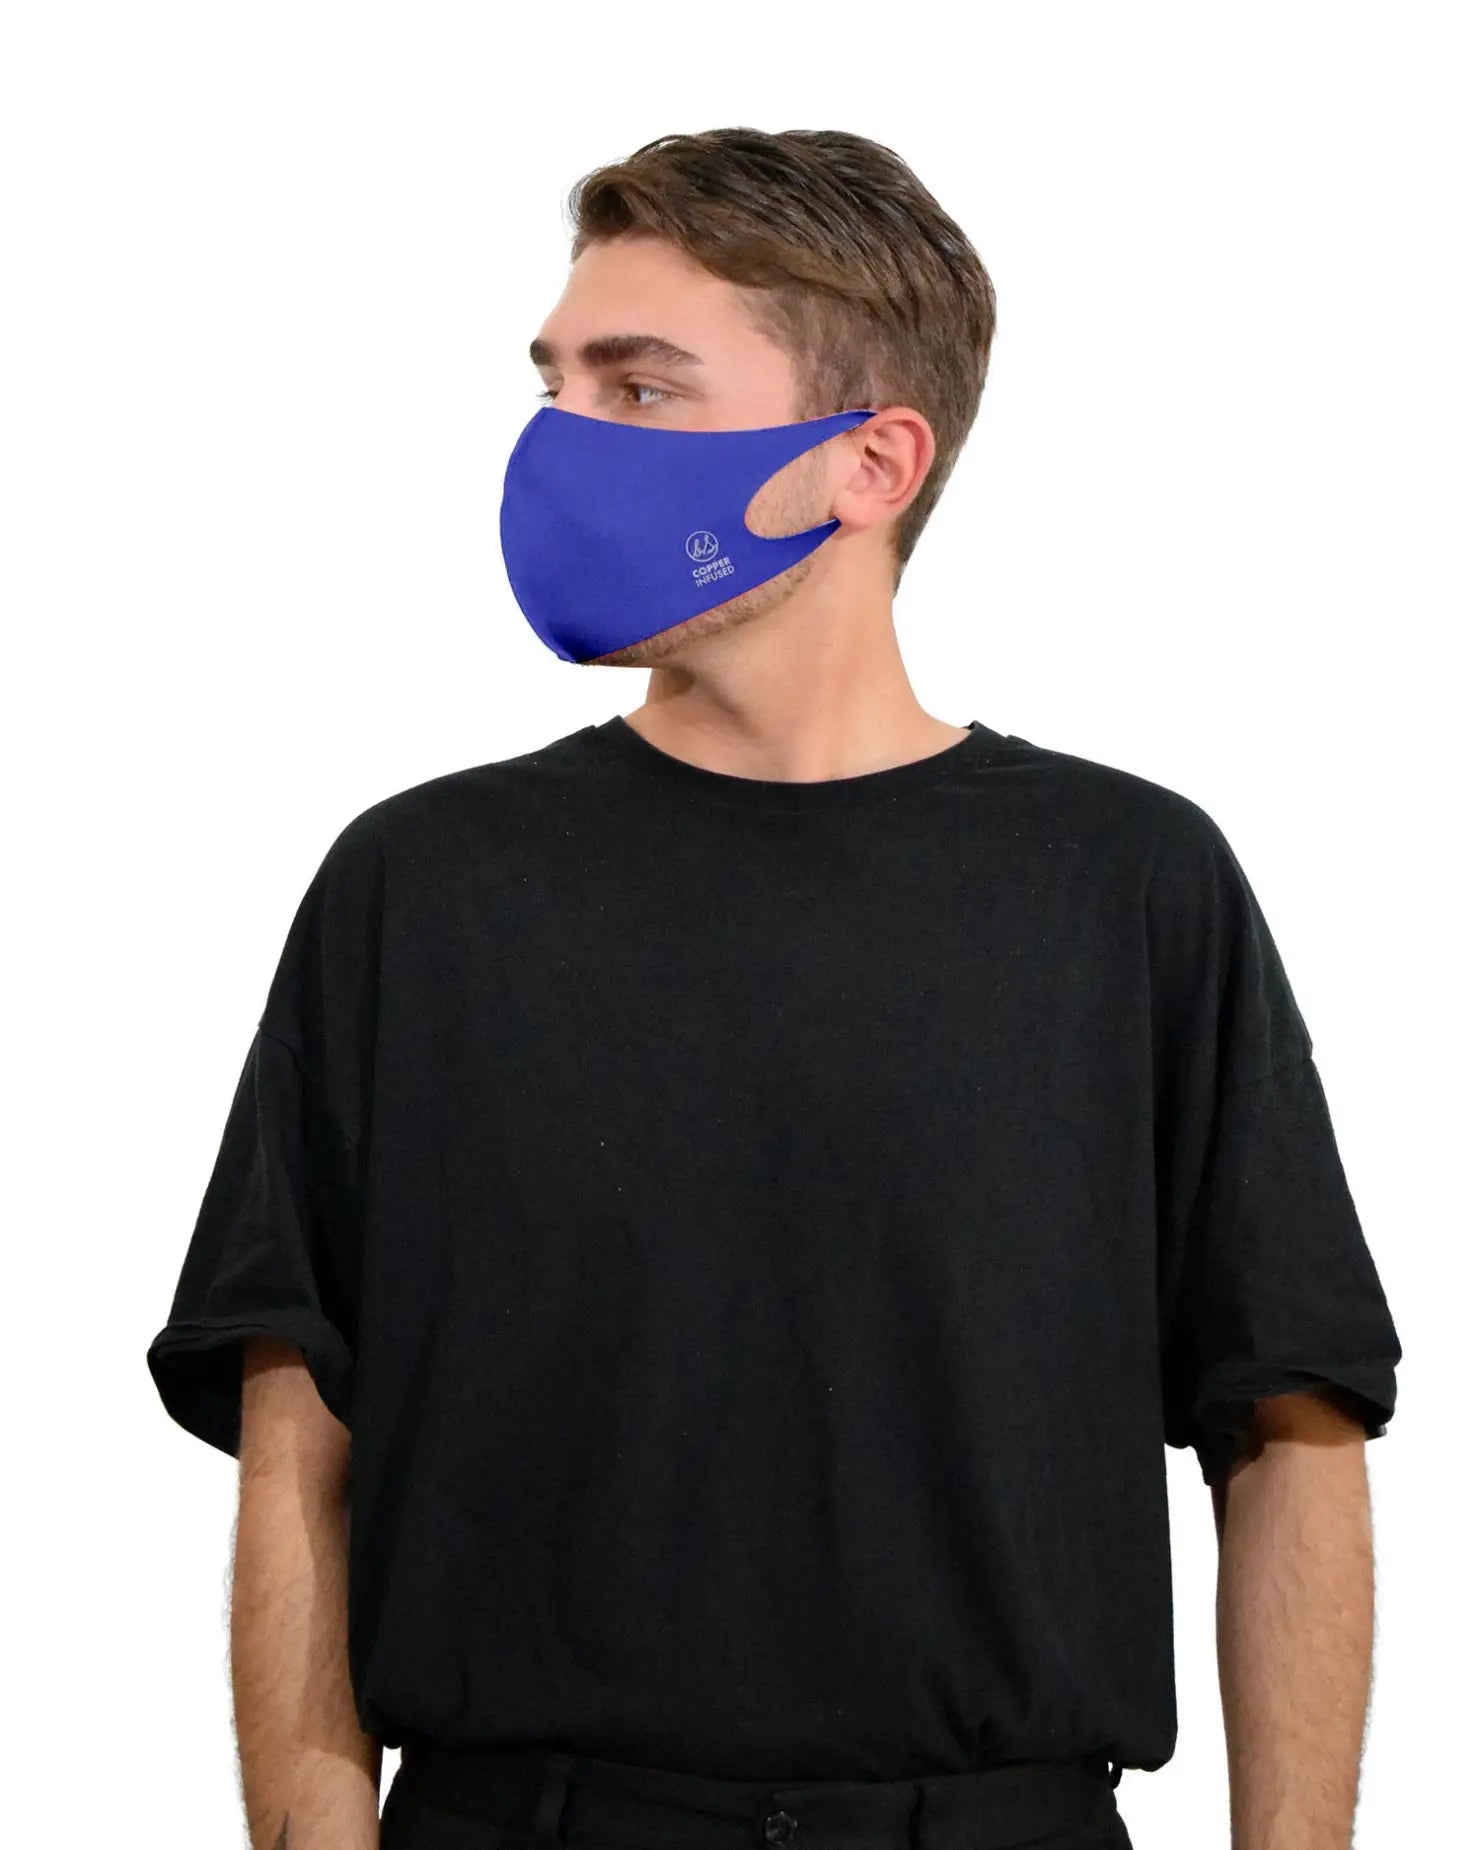 A man wearing a copper-infused blue face mask in 3D design.